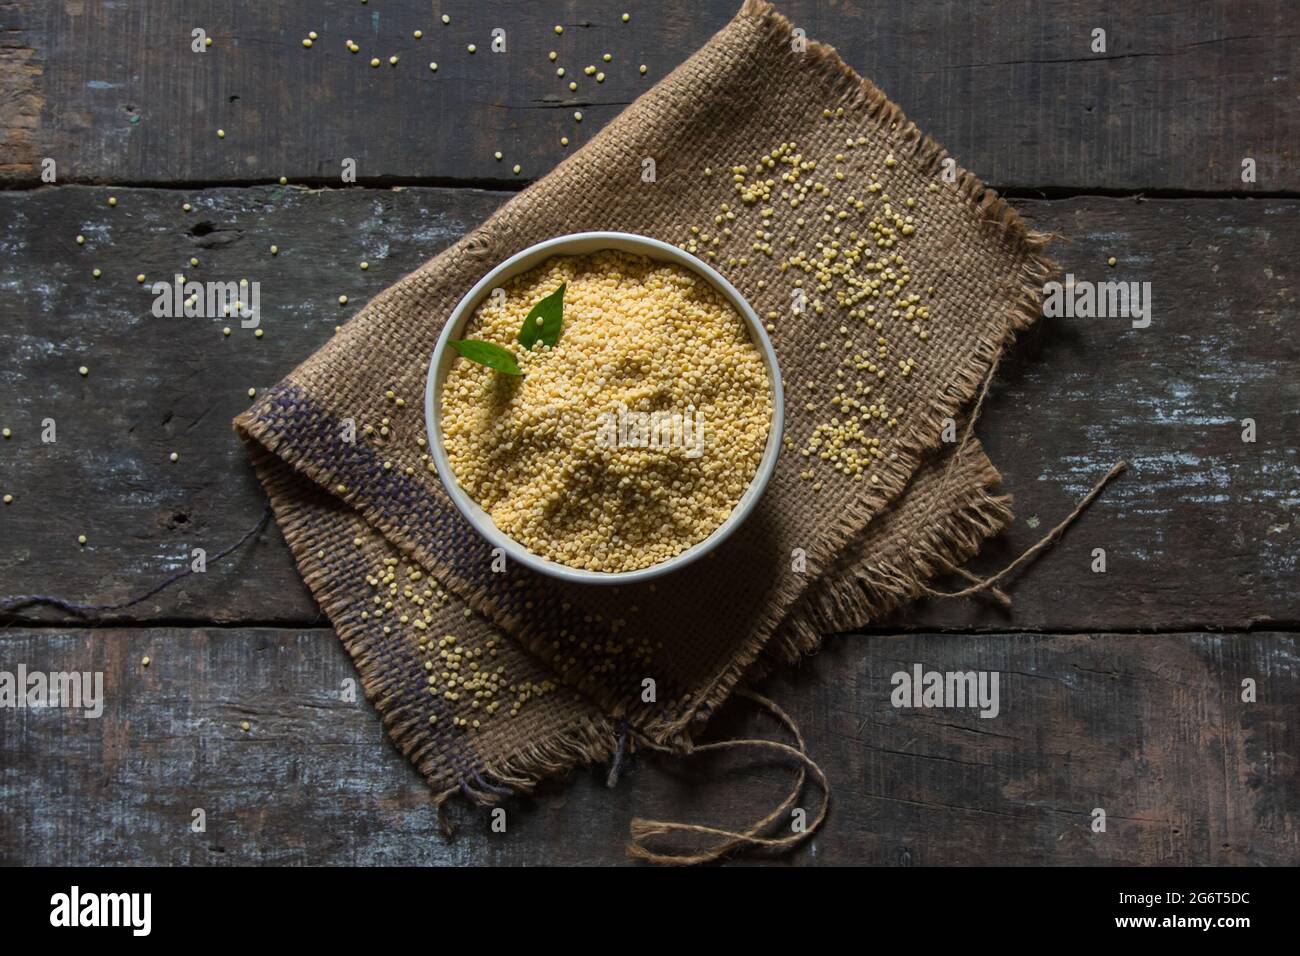 Top view of moong dal or yellow lentils food background. An important ingredient for north Indian cuisine. Stock Photo